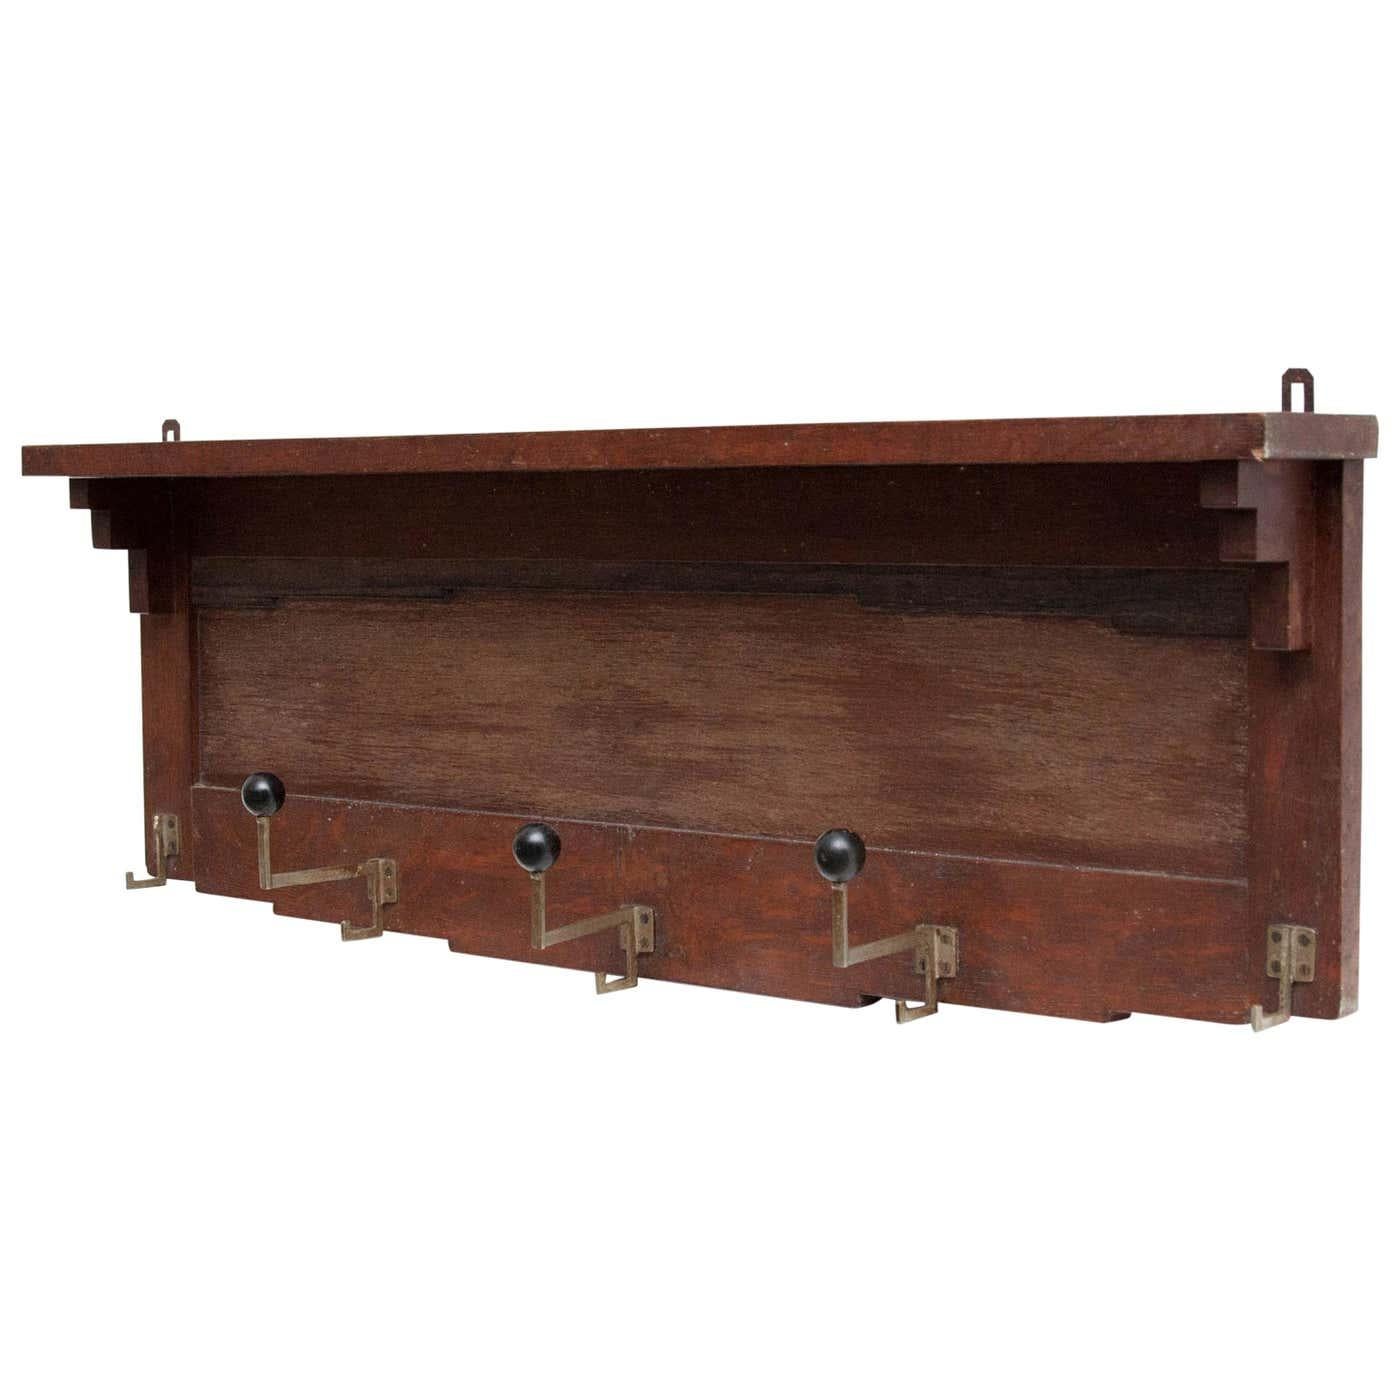 Add a touch of vintage charm and functionality to your entryway with this Amsterdam School style coat rack. Crafted circa 1940 and manufactured in Holland, this piece showcases the rationalist design principles prominent during that era.

Made of